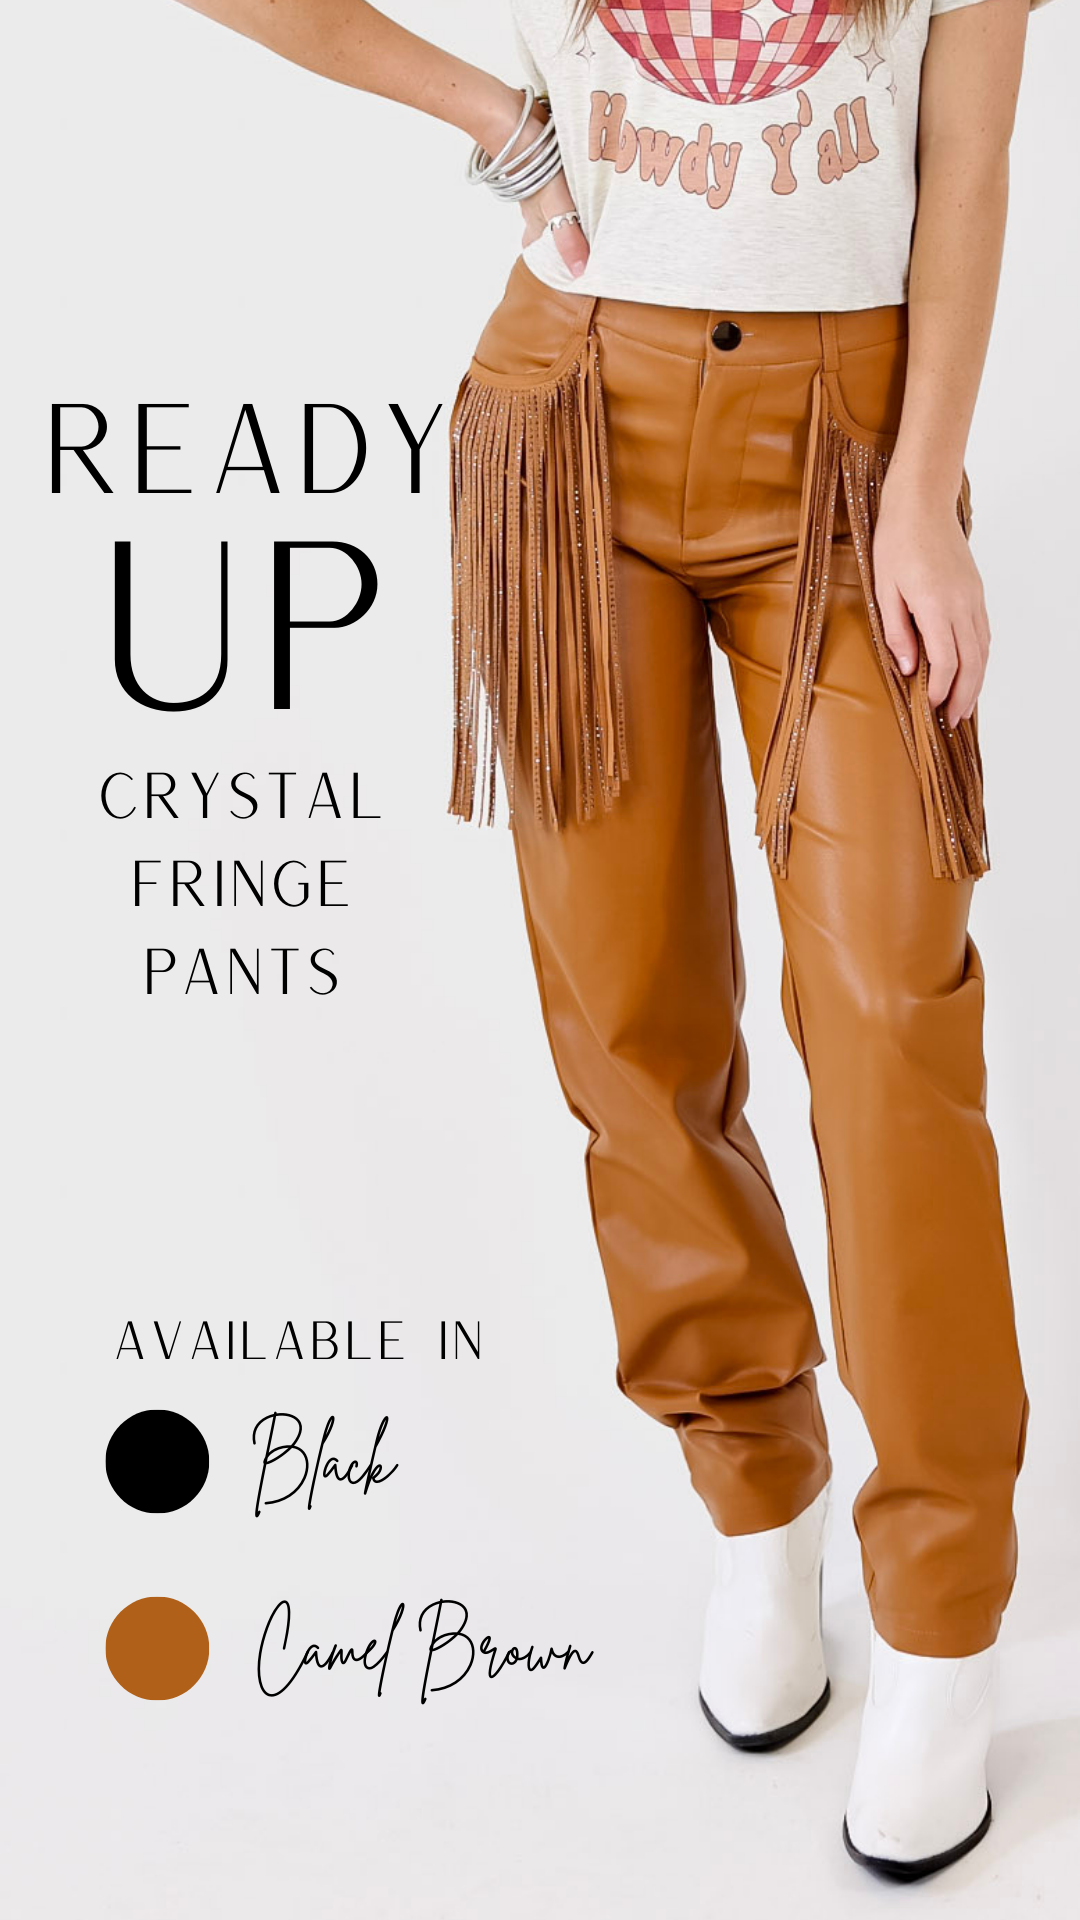 Ready Up Crystal Fringe Faux Leather Pants in Camel Brown - Giddy Up Glamour Boutique